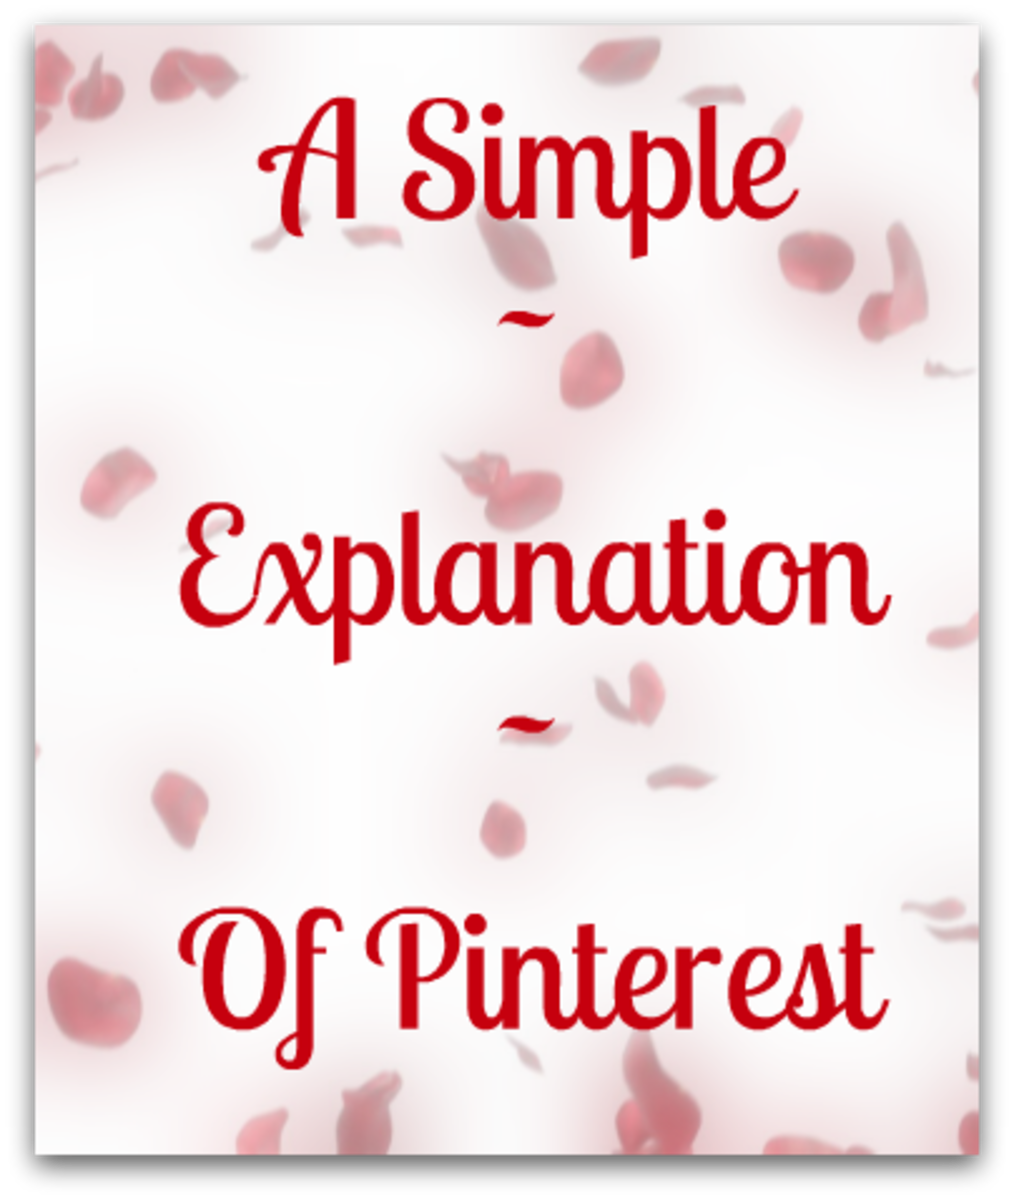 A Simple Explanation of Pinterest